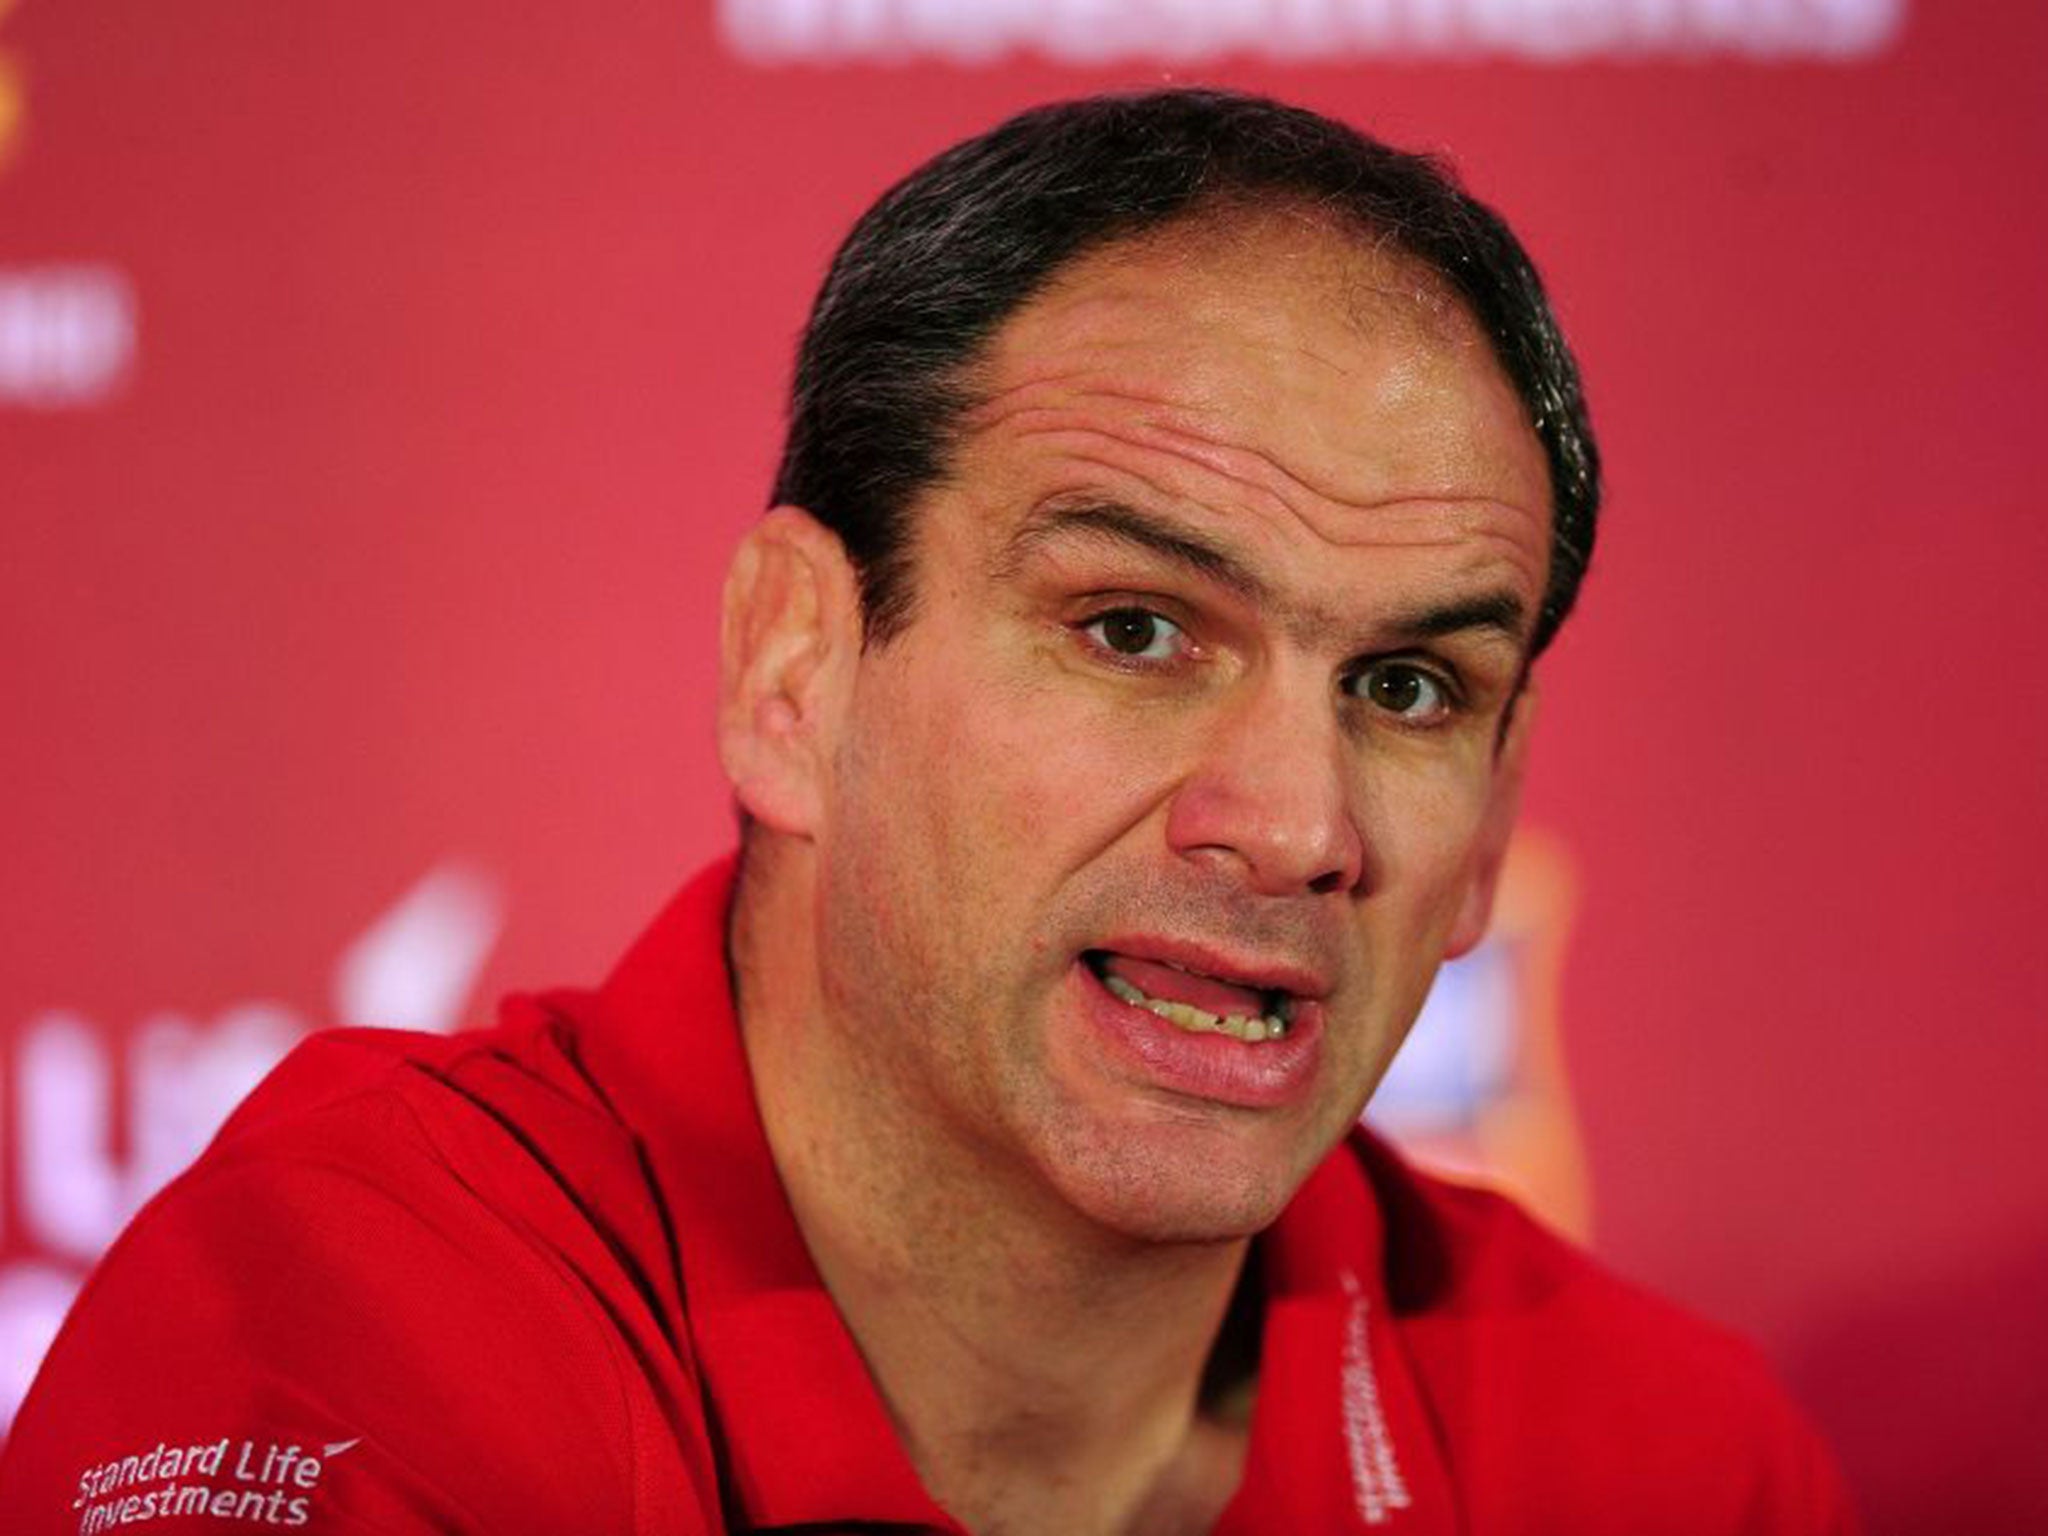 Martin Johnson raised Dylan Hartley’s poor disciplinary record when discussing England captaincy